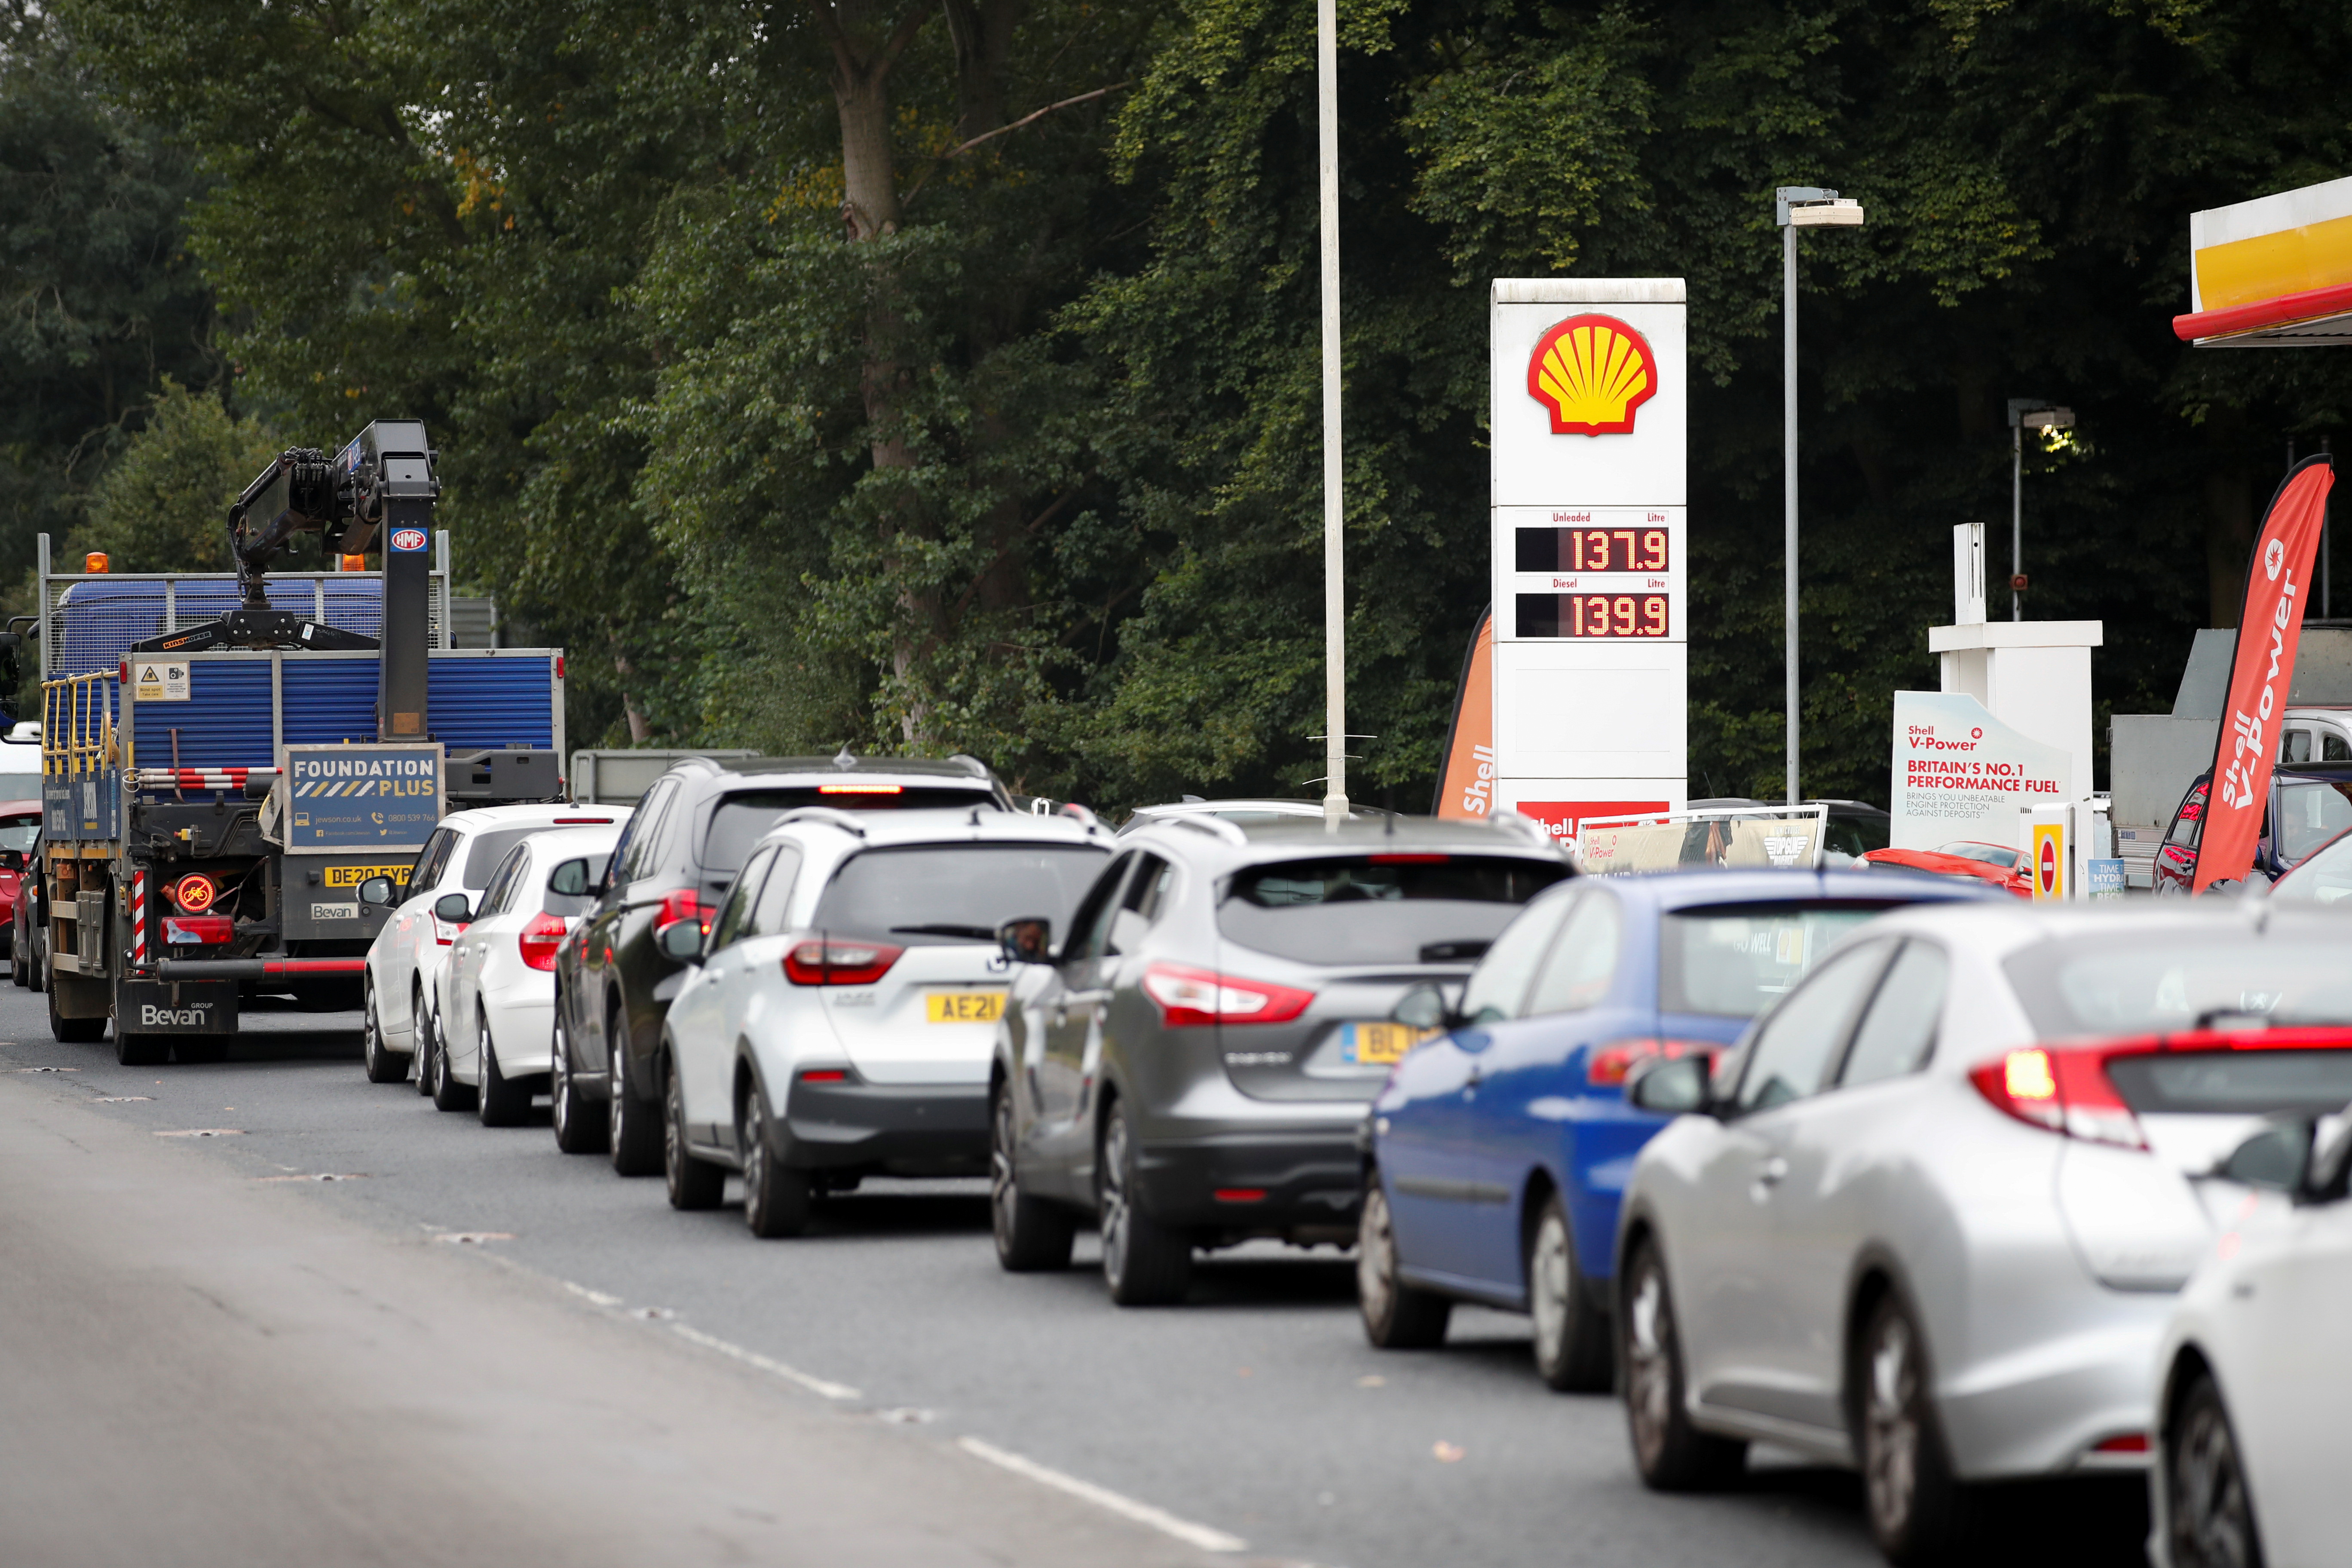 Vehicles queue to refill outside a Shell fuel station in Redbourn